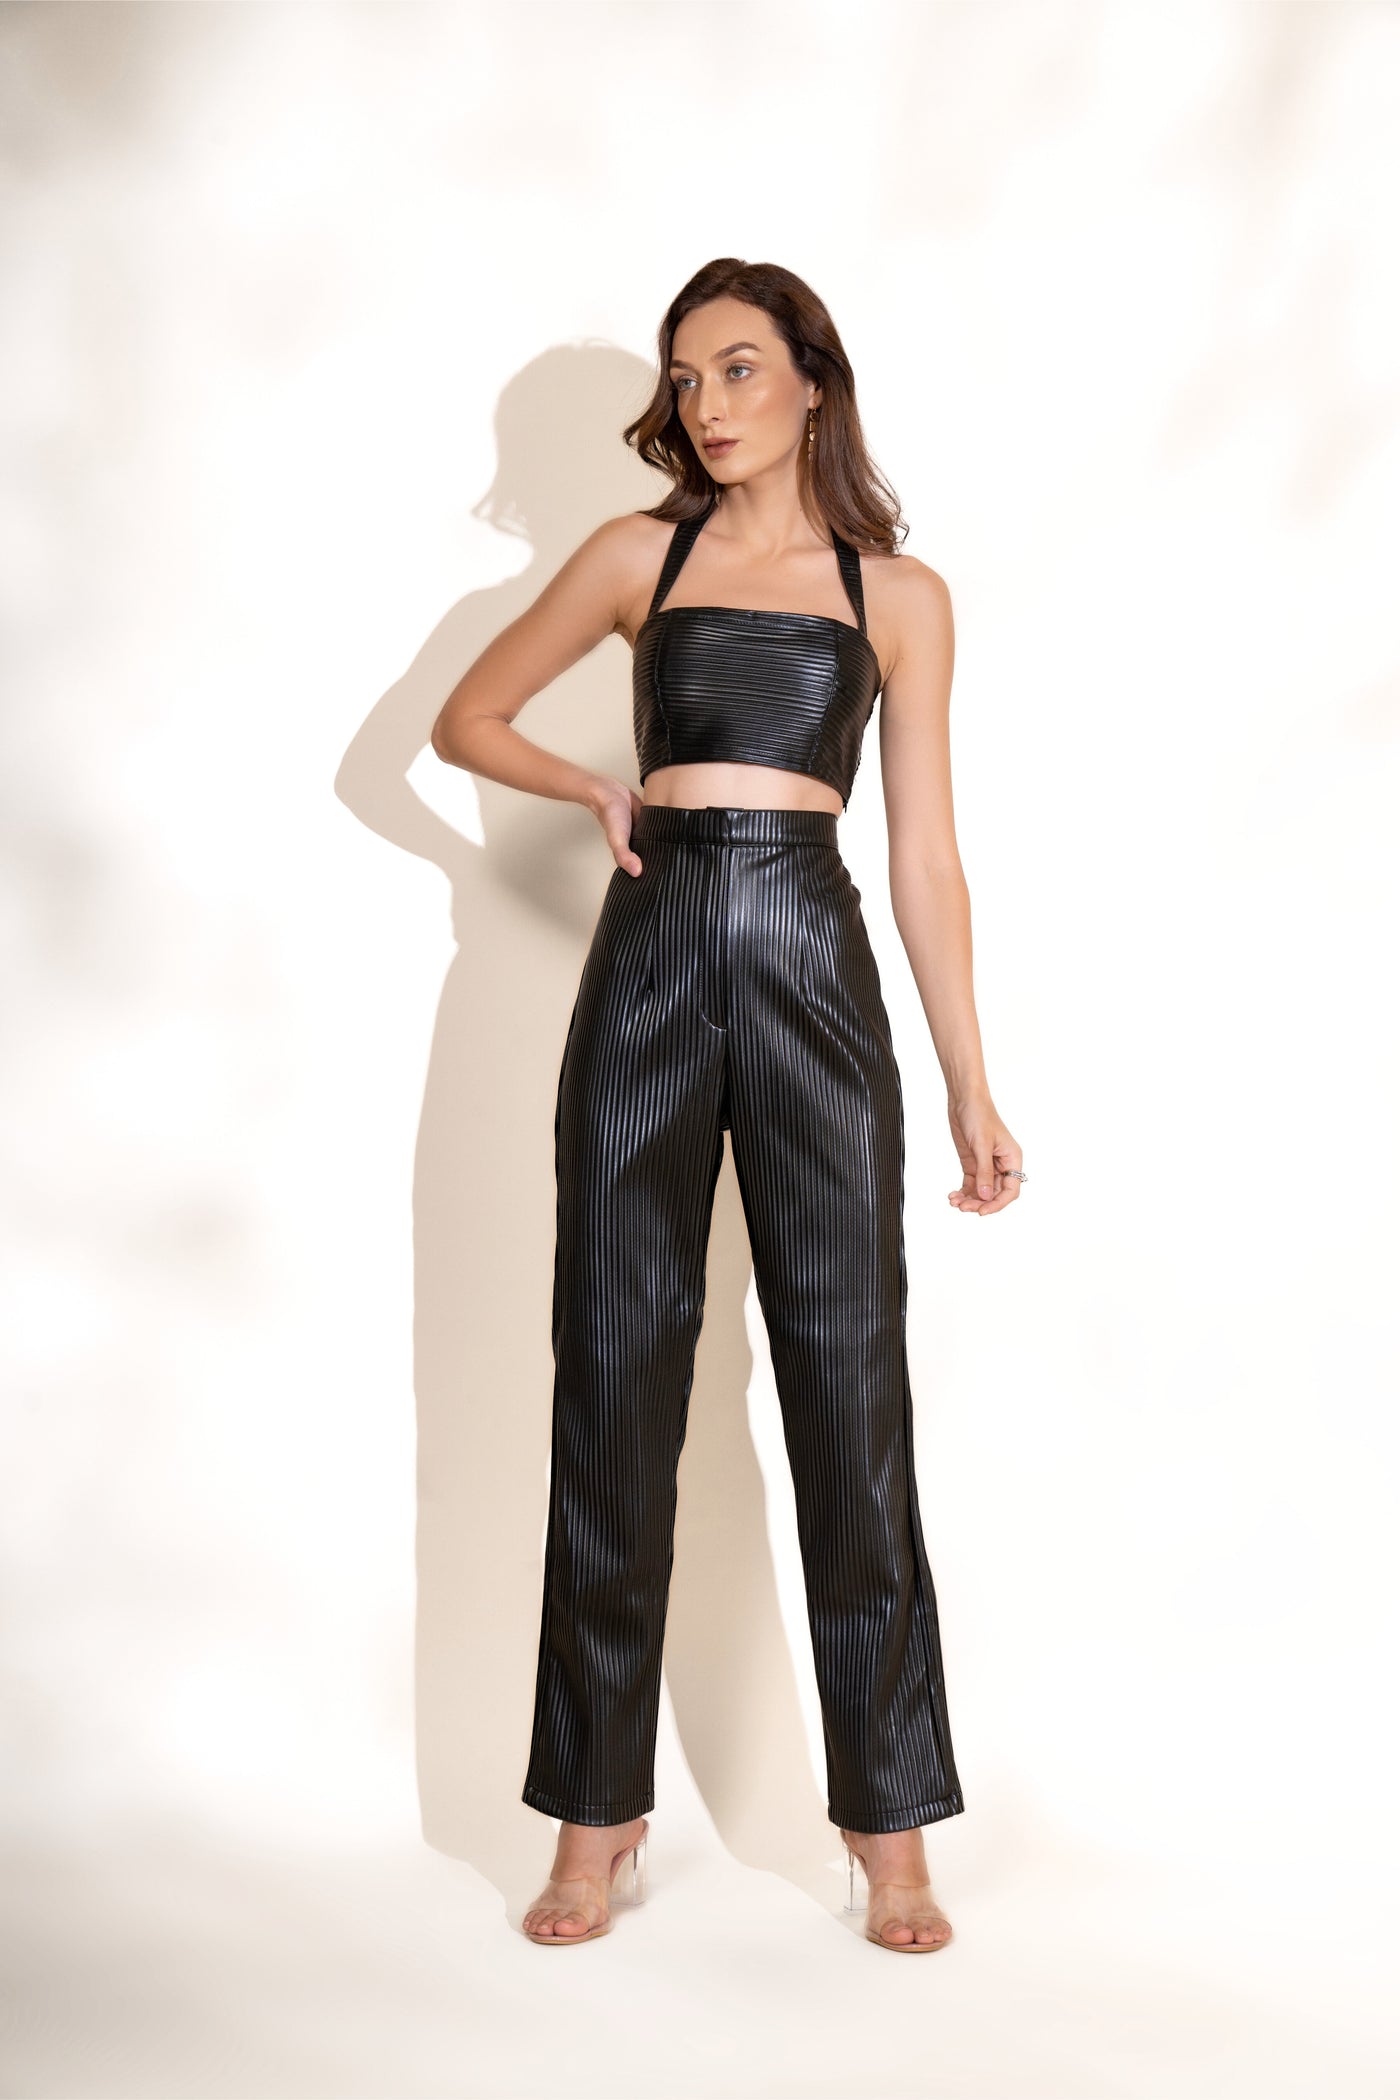 Black Pleated Leather Crop Top